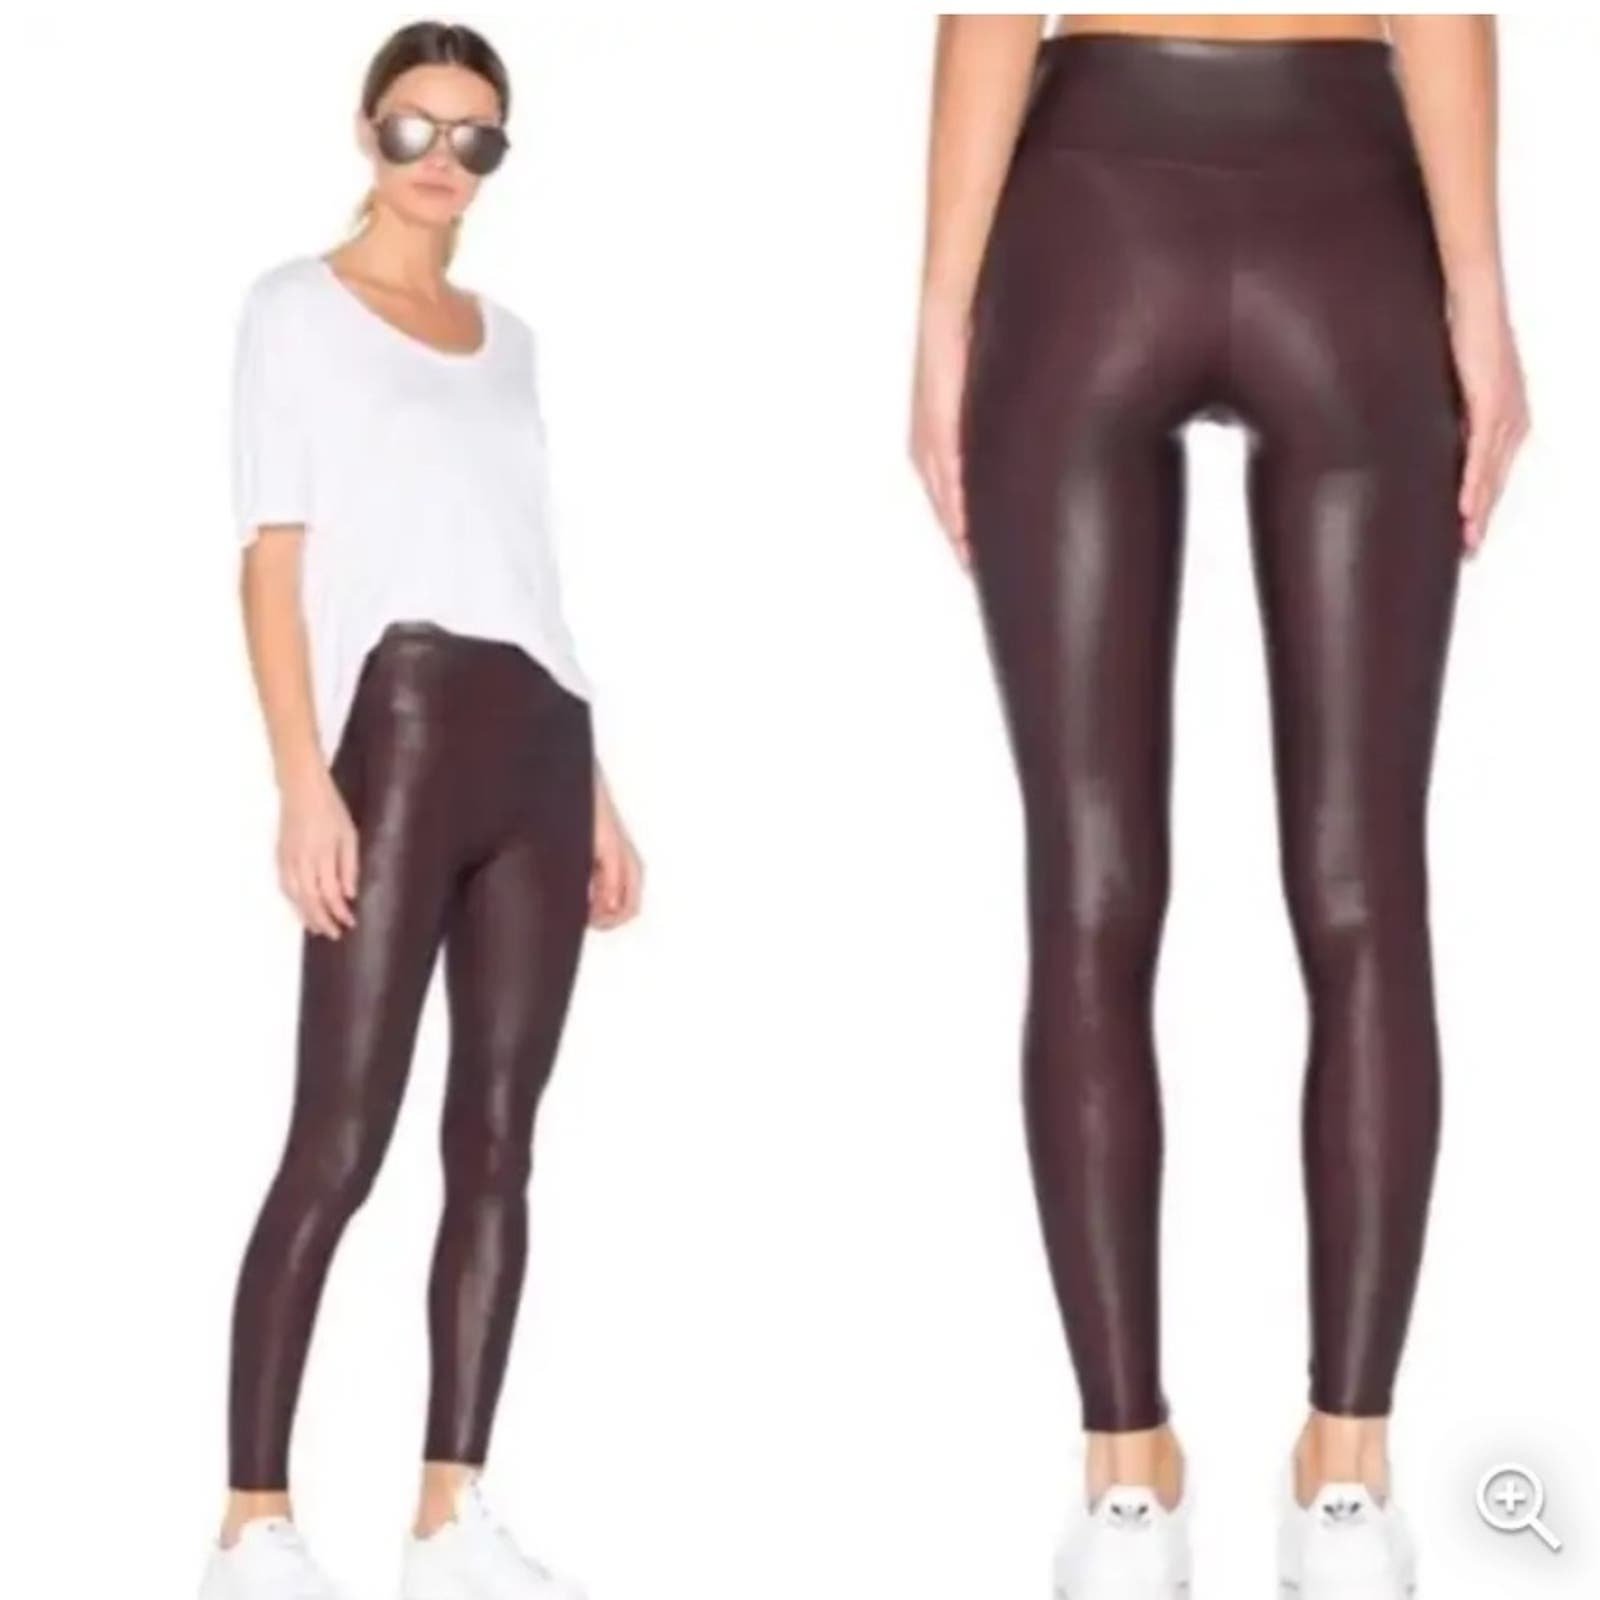 Spanx Faux Leather Leggings in Oxblood Mahogany 3cLVmTqPB